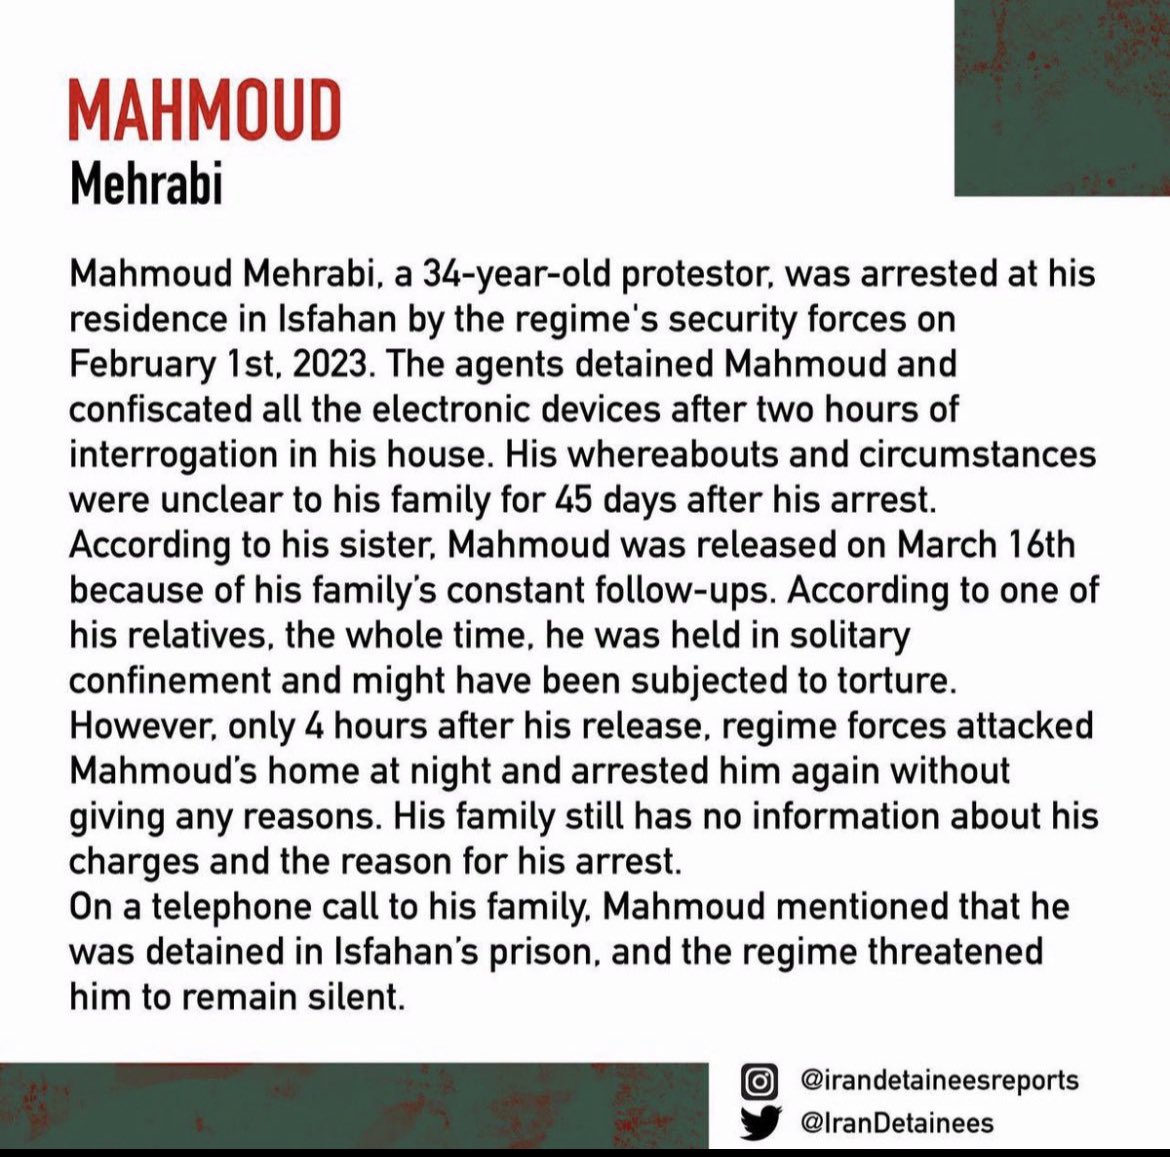 To the Free World: 
Iranians suffer under a brutal regime. Their peaceful protests are met with violence, torture, and death. Mahmoud Mehrabi is one of many, arrested by the IRGC, and facing imminent danger. 
Stand up, be their voice! 
#MahmoudMehrabi #محمود_مهرابی #مهسا_امينی